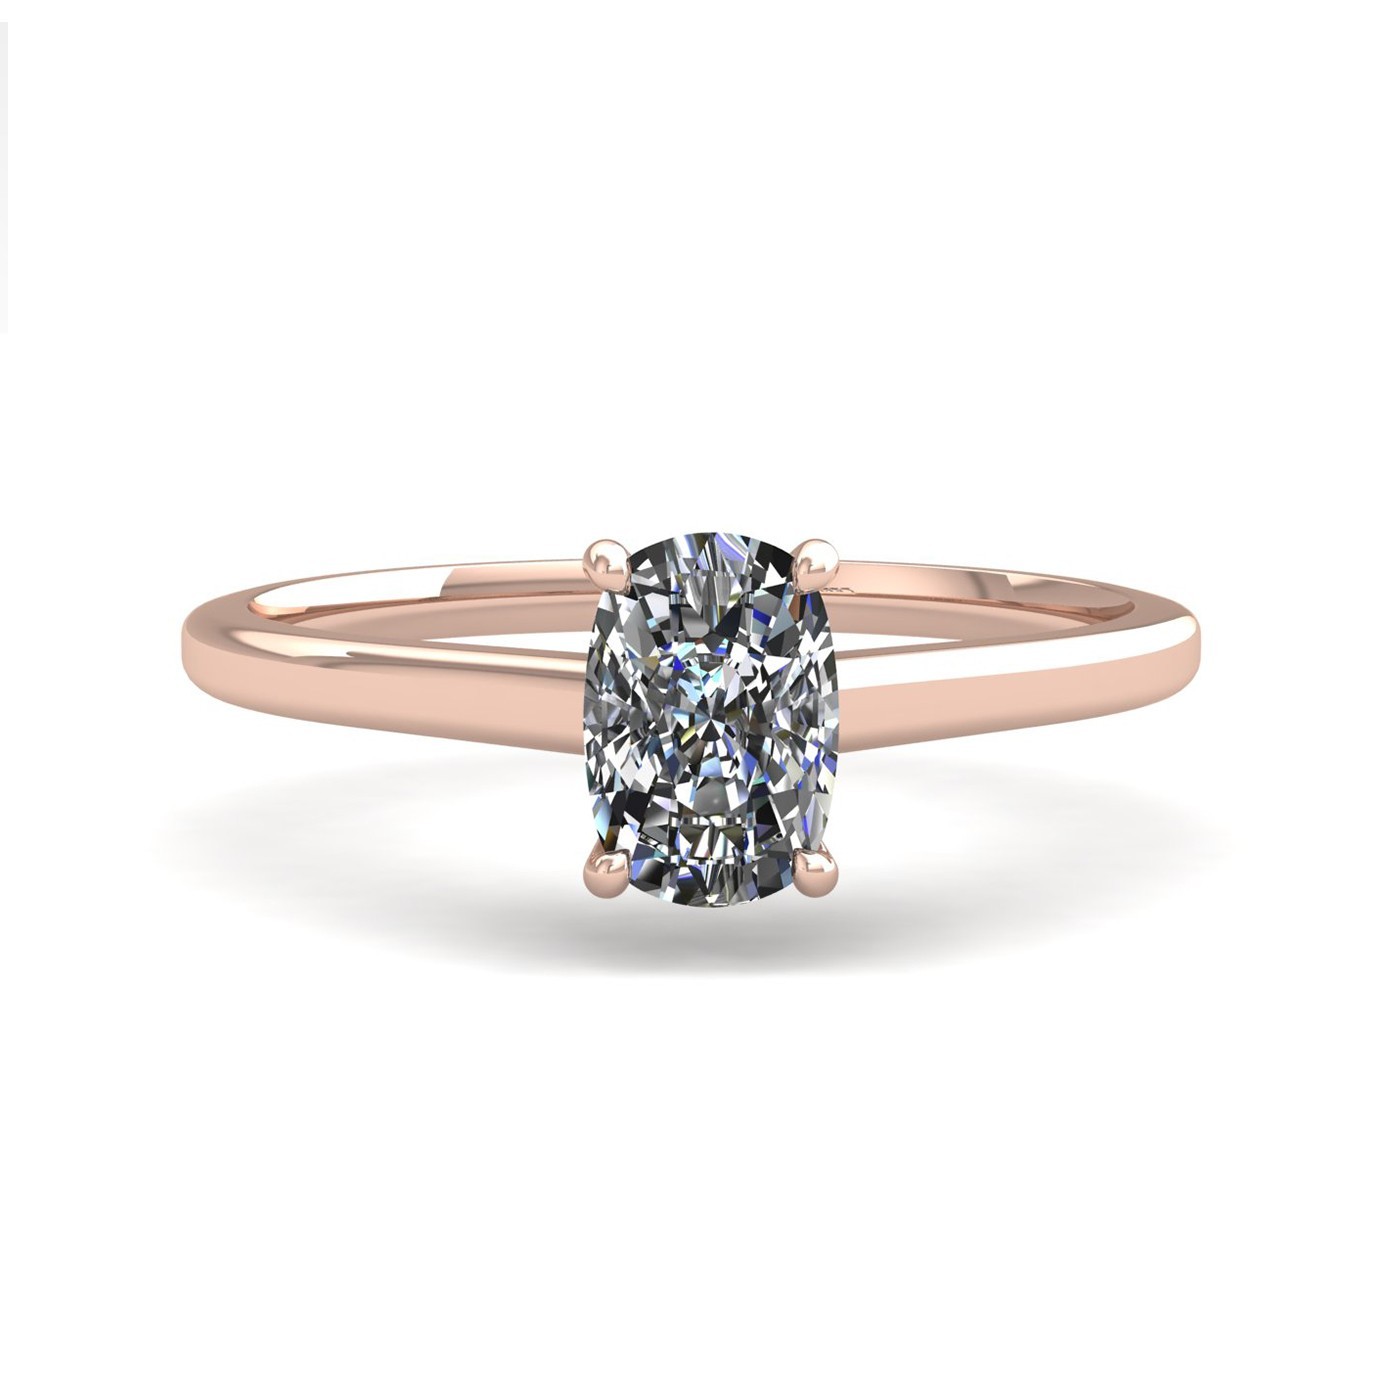 18k rose gold  2.00 ct 4 prongs solitaire elongated cushion cut diamond engagement ring with whisper thin band Photos & images